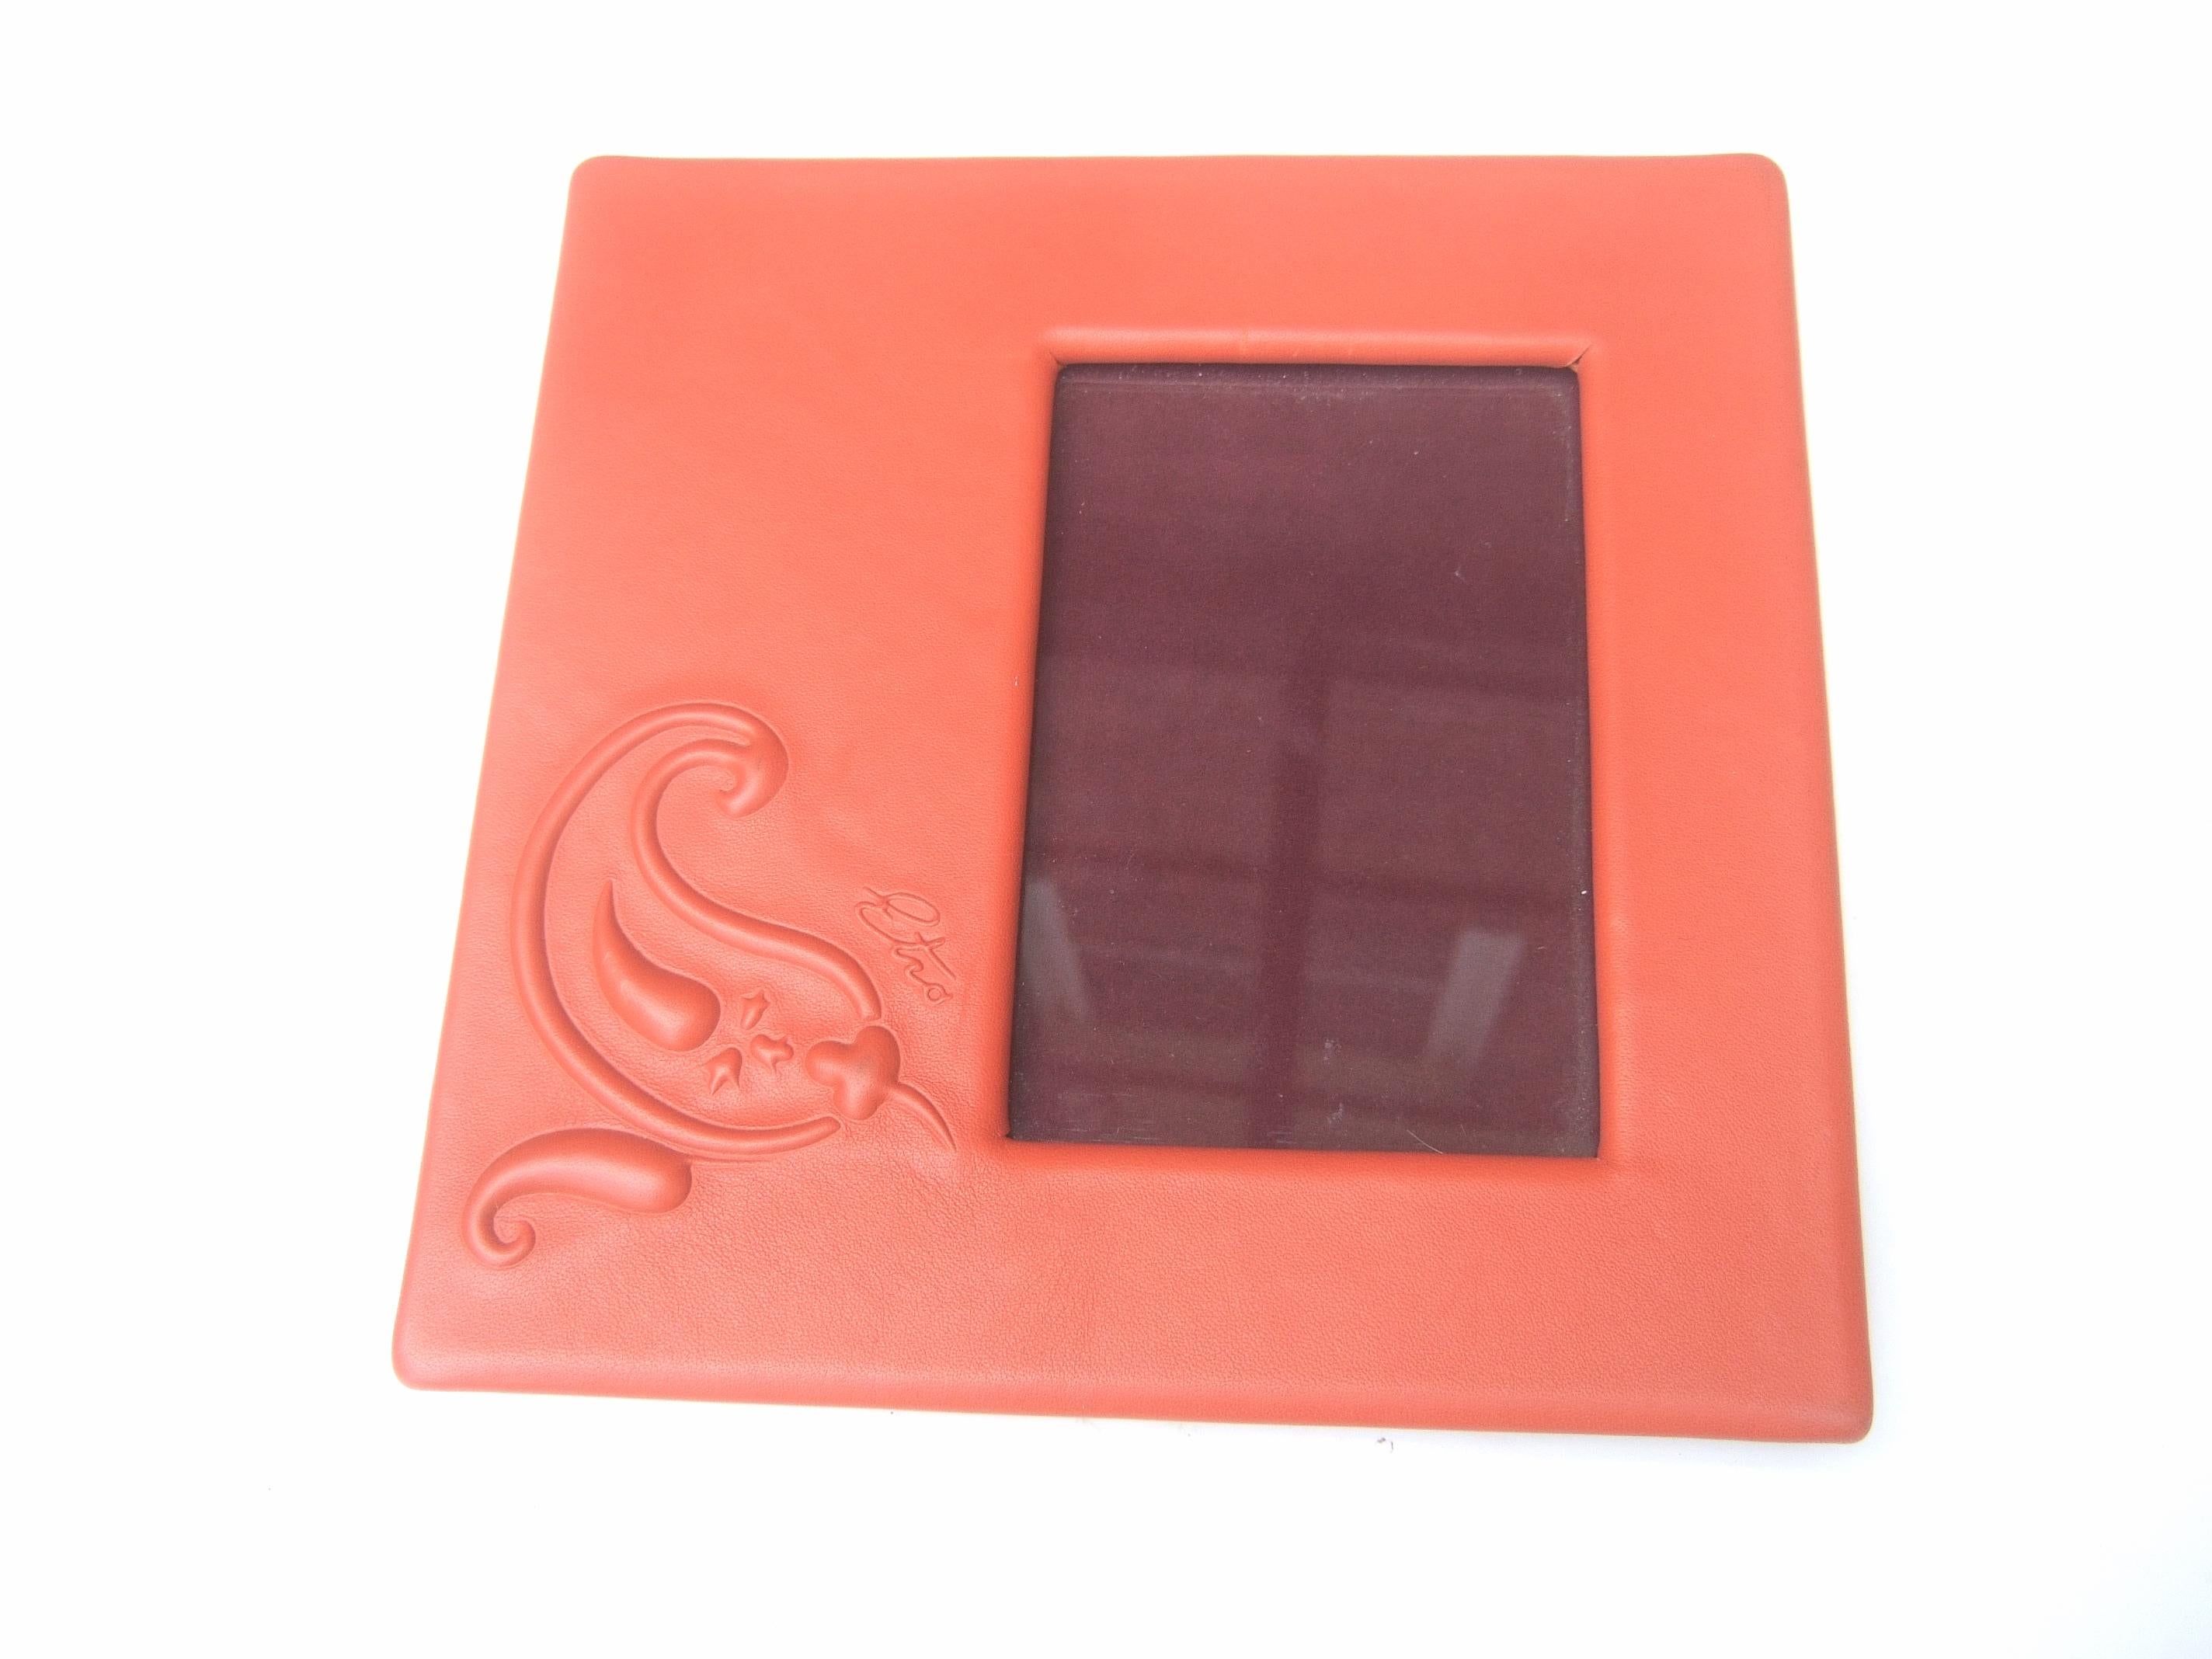 Etro Italian orange leather photo frame c 21st 
The stylish picture frame is designed 
with smooth tangerine color orange leather

One of the bottom corners has a raised 
leather paisley swirl design with Etro's script
 name. The glass display